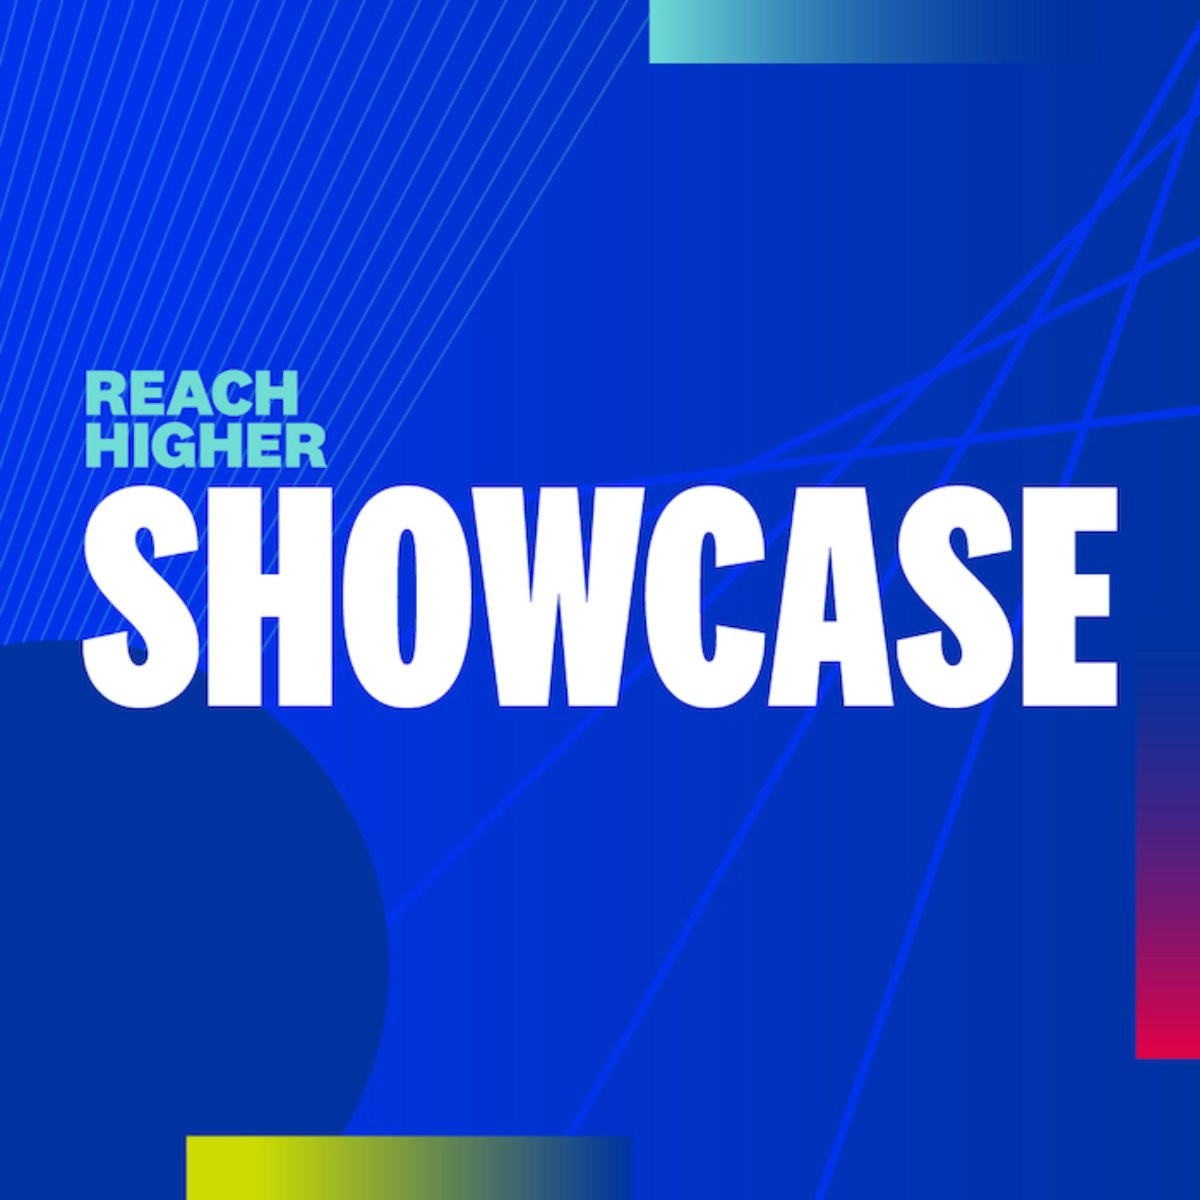 Reach Higher Showcase text in white with blue background